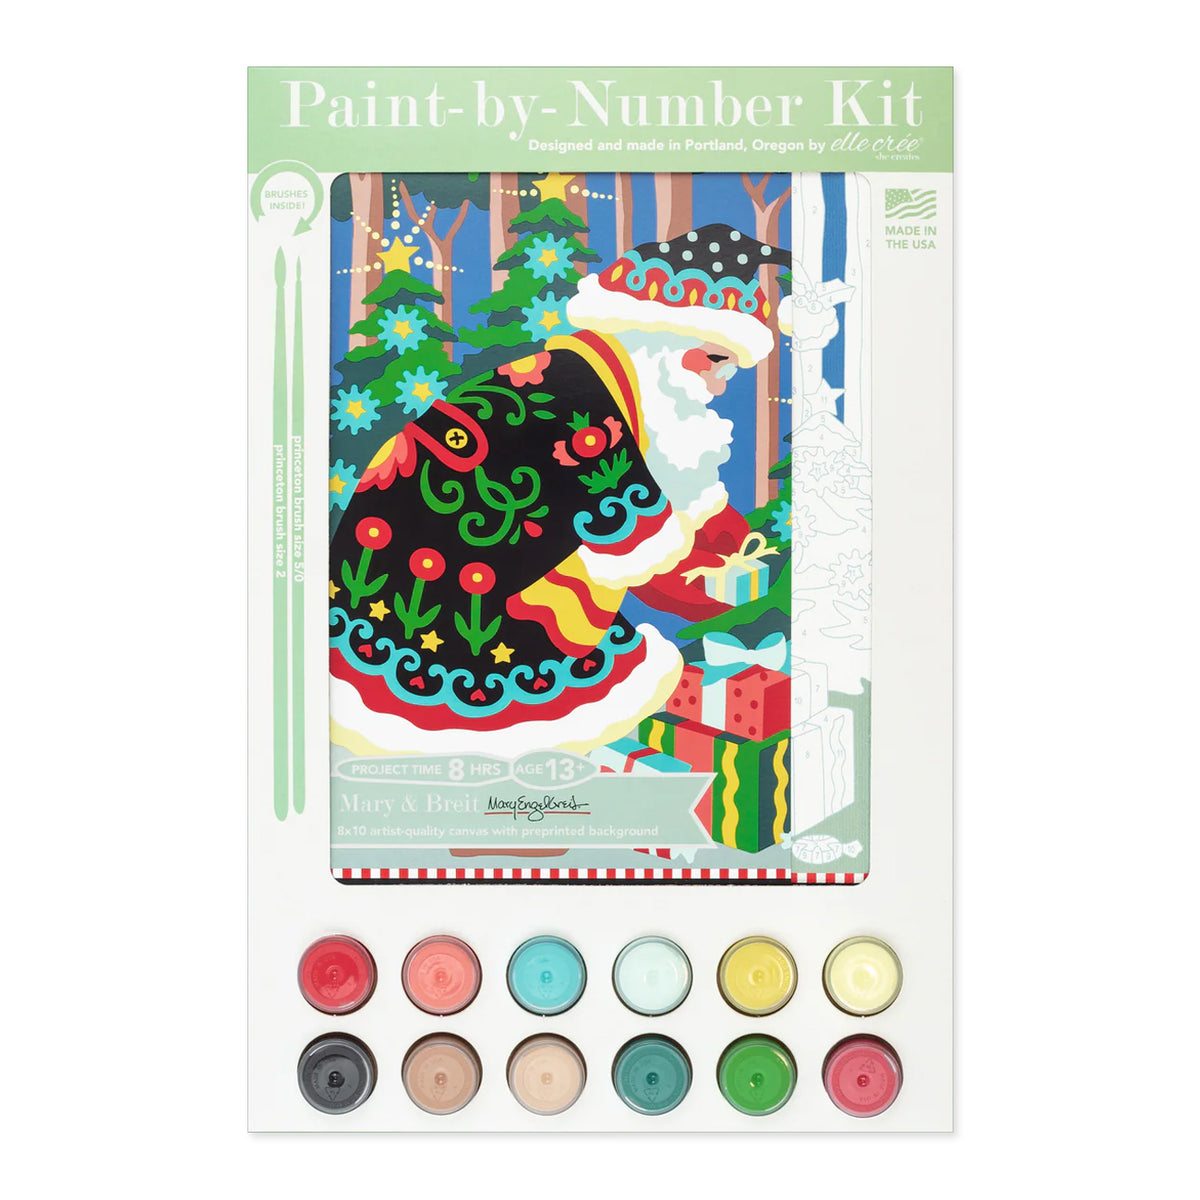 Mary & Breit Paint-by-Number Kit